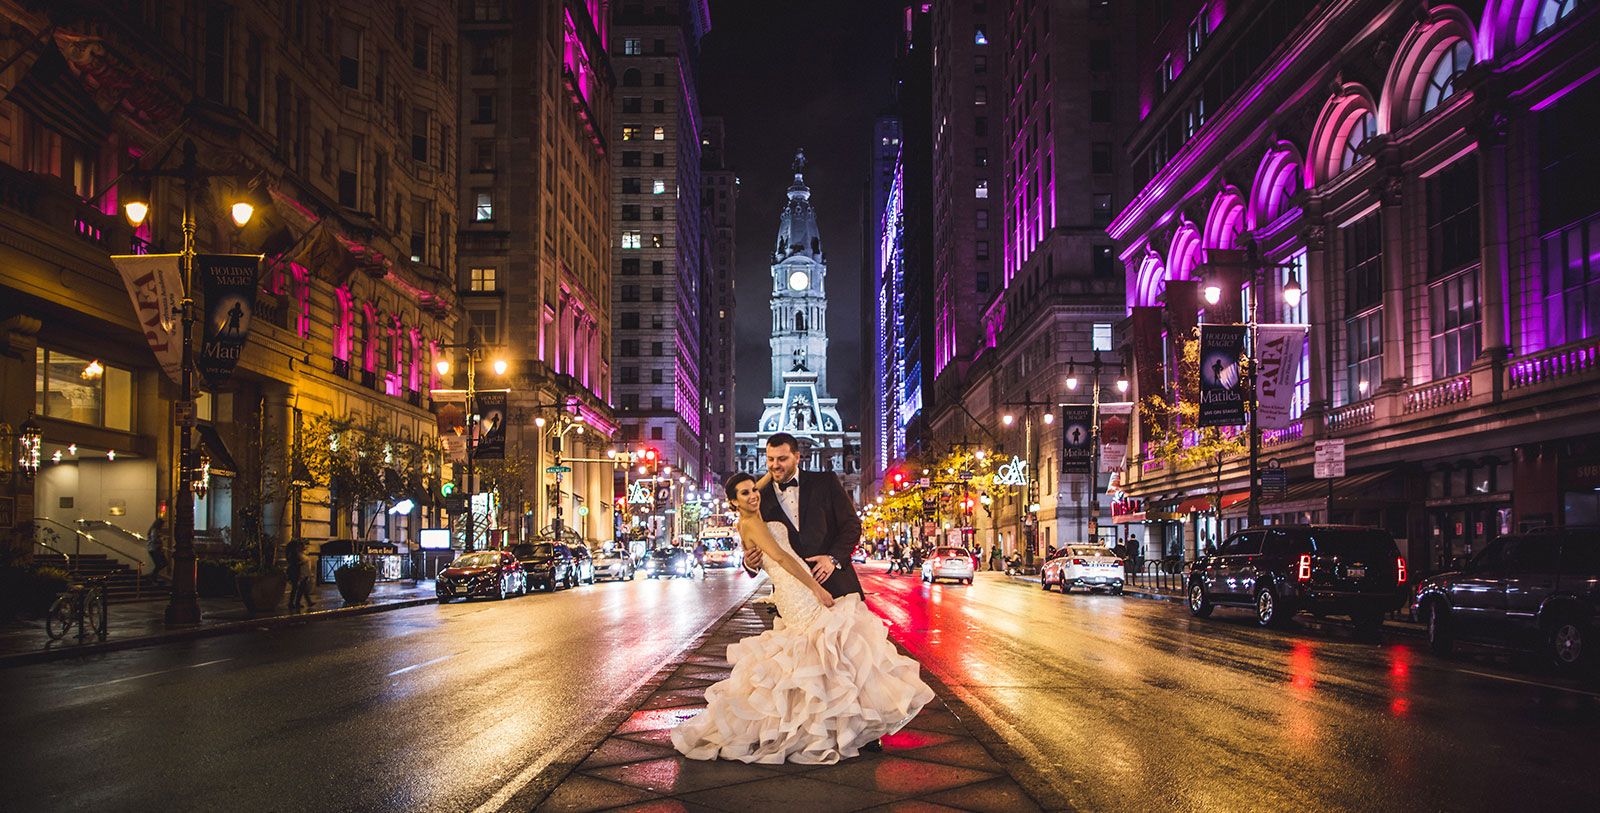 The Arts Ballroom - Best wedding and event venue Philadelphia - Wedding, Corporate, Gala, Social and Catering